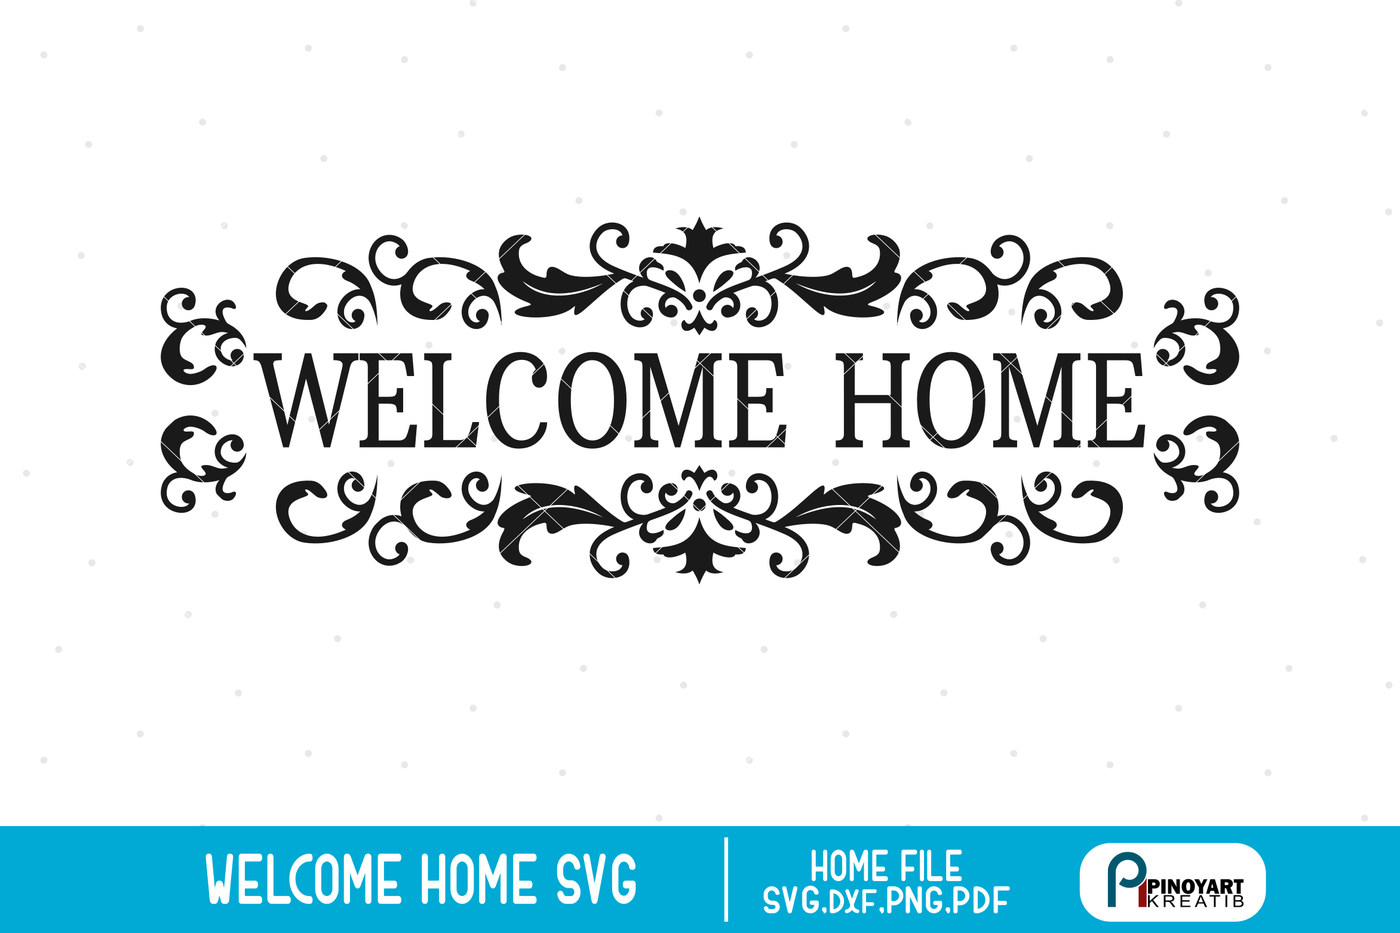 welcome home clip art